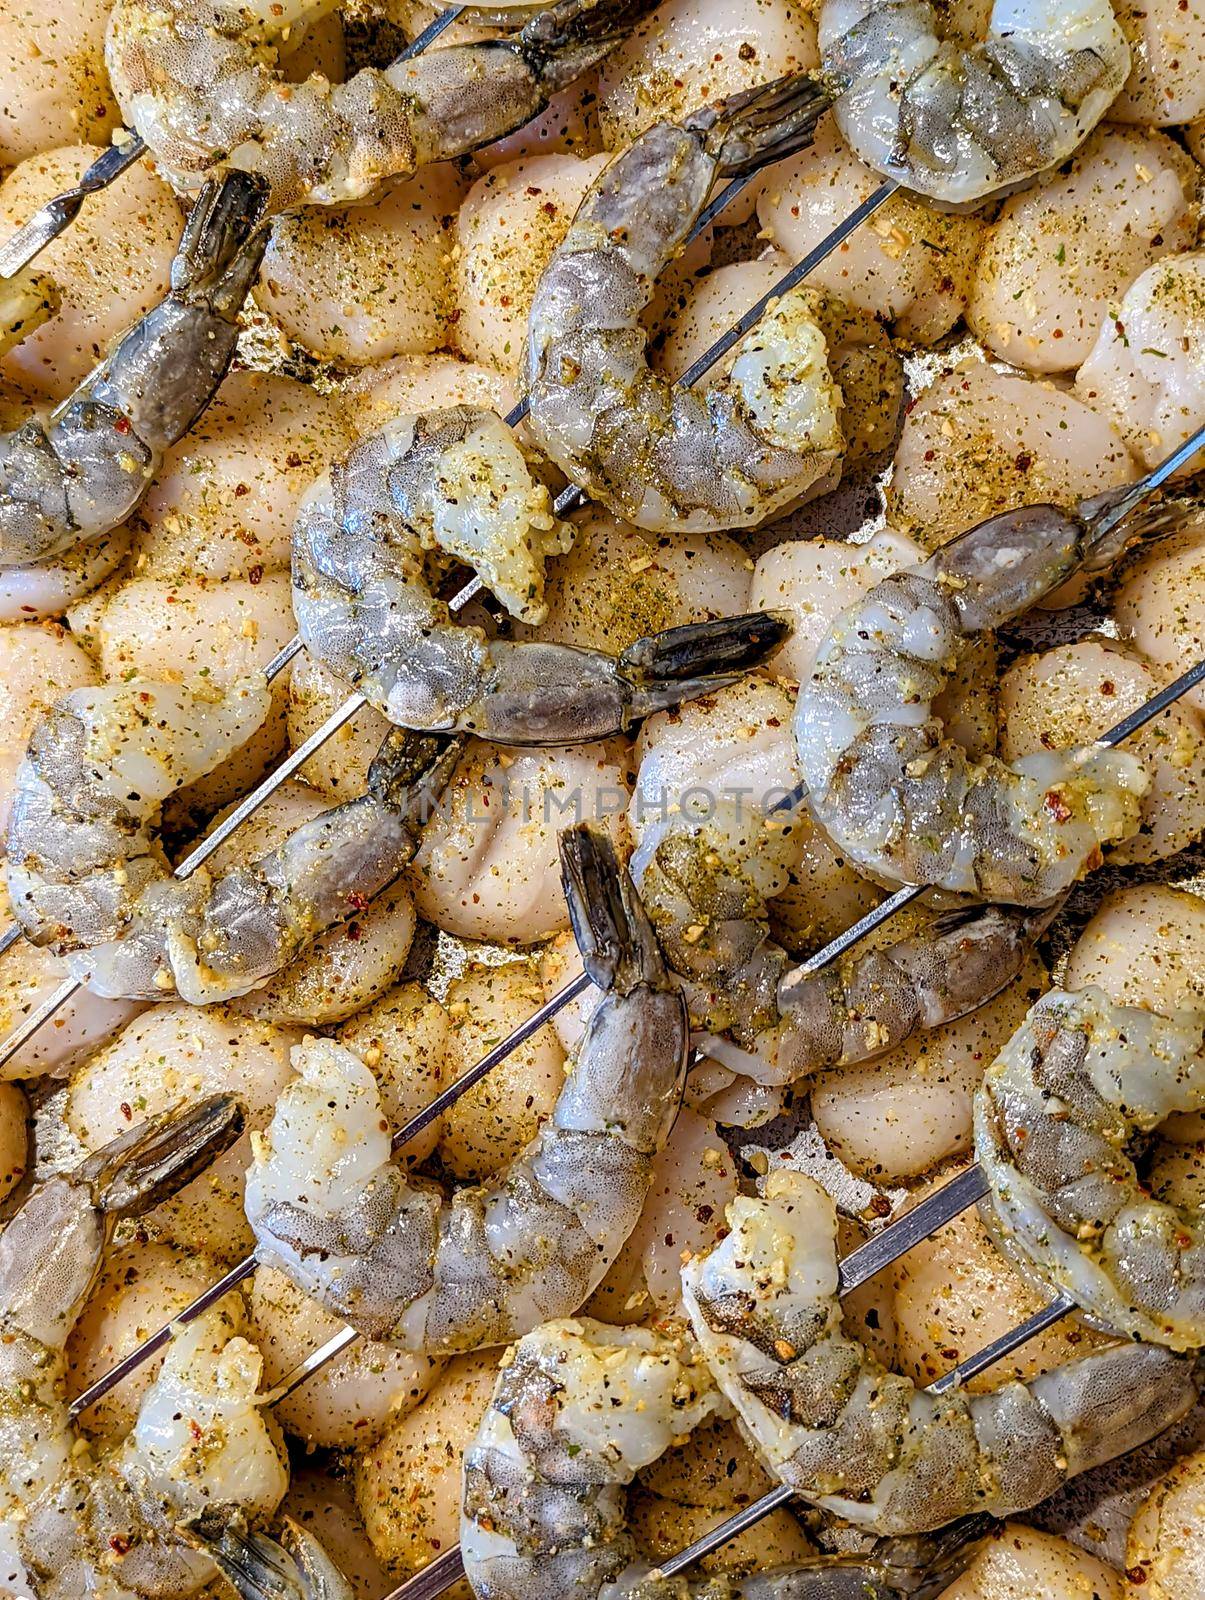 raw seasoned shrimp and scallops ready to grill by digidreamgrafix